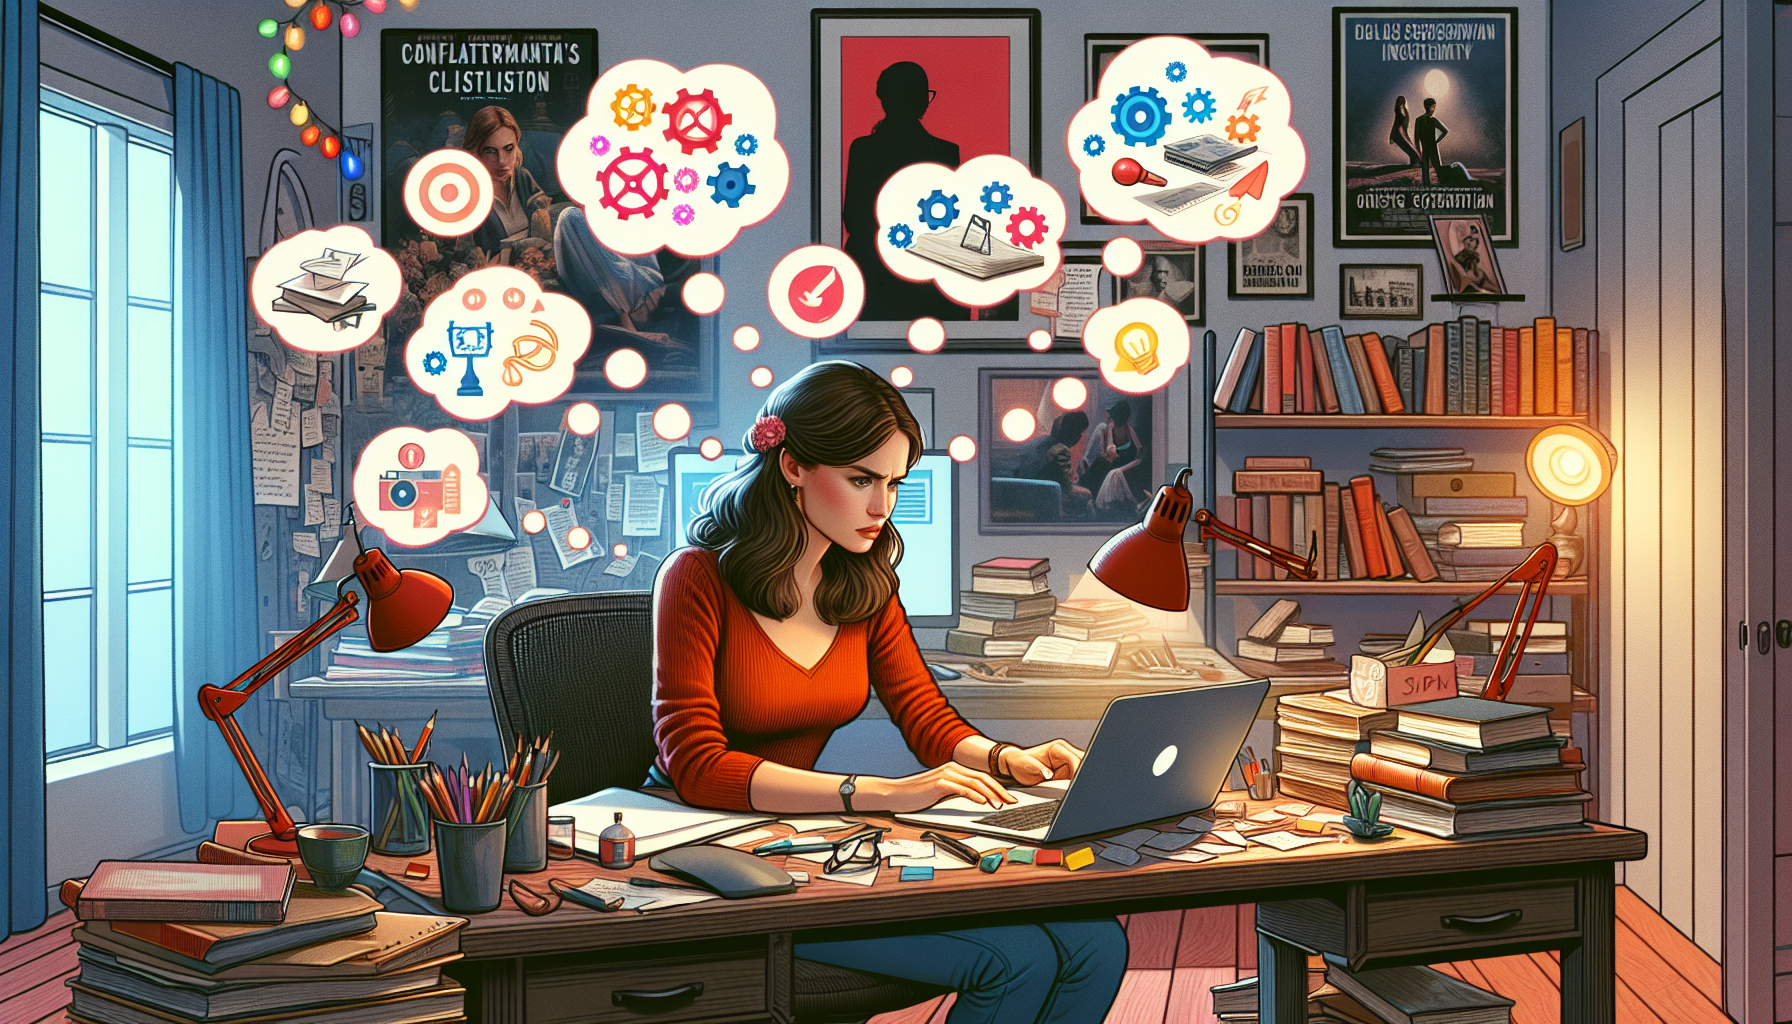 An imaginative digital painting of a screenwriter sitting in a cozy, cluttered study, surrounded by film posters and books, intensely focused on a glowing laptop, with visible thought bubbles containi